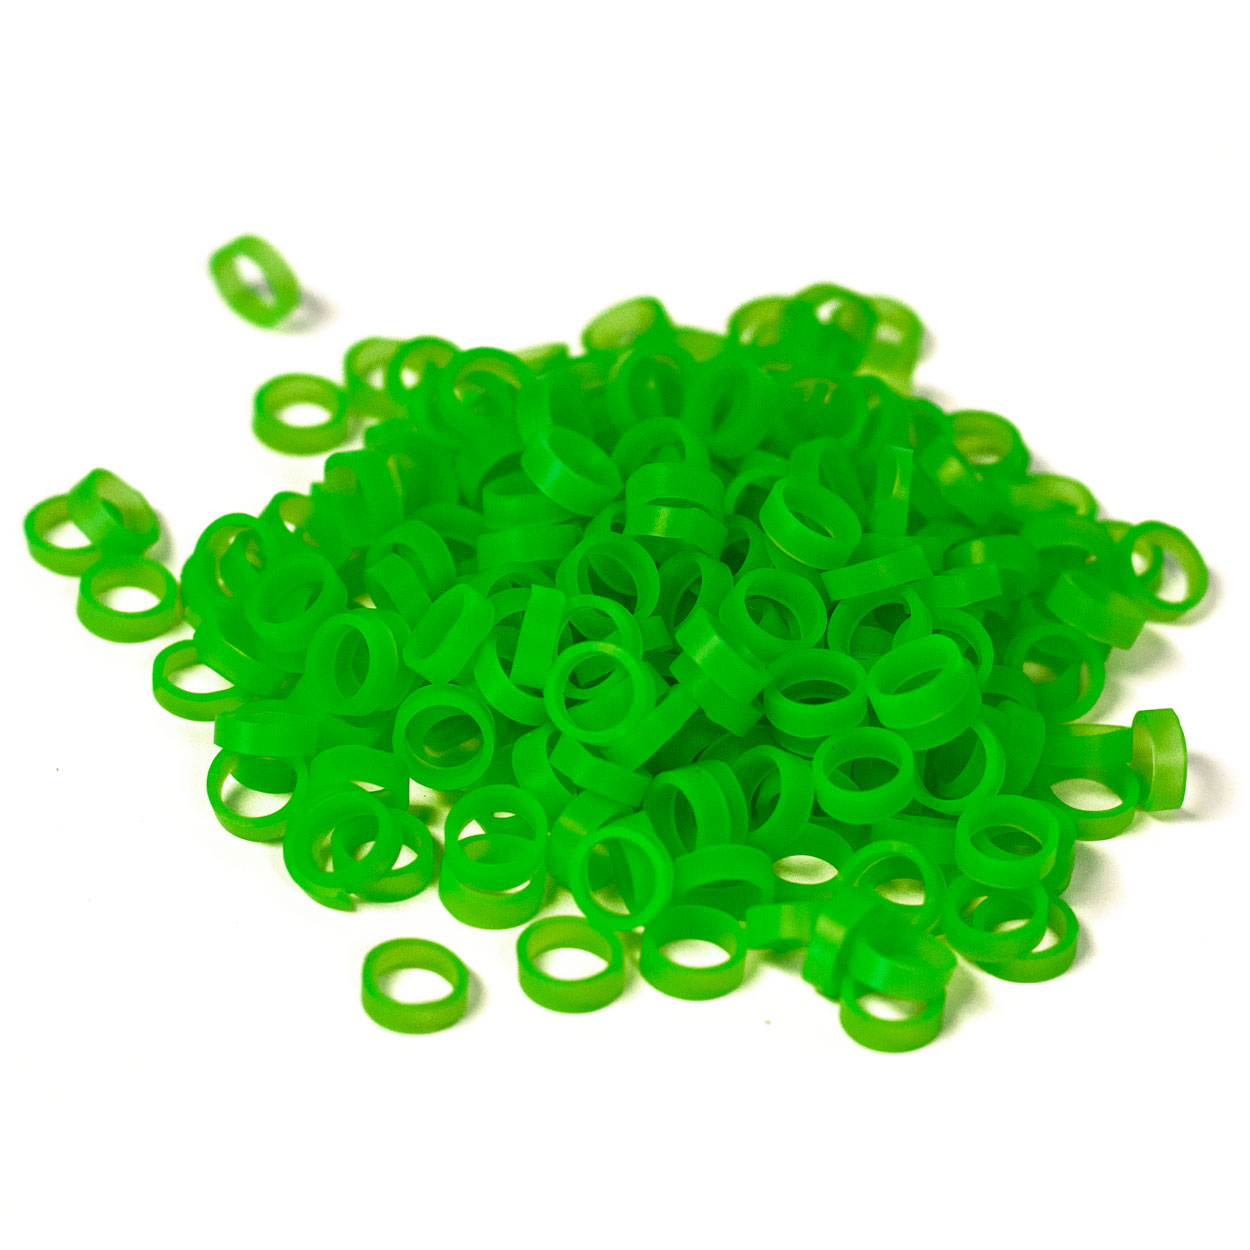 Band of Rebels - elastic GREEN silicon rubber band for tattoo cartridges - REBEL